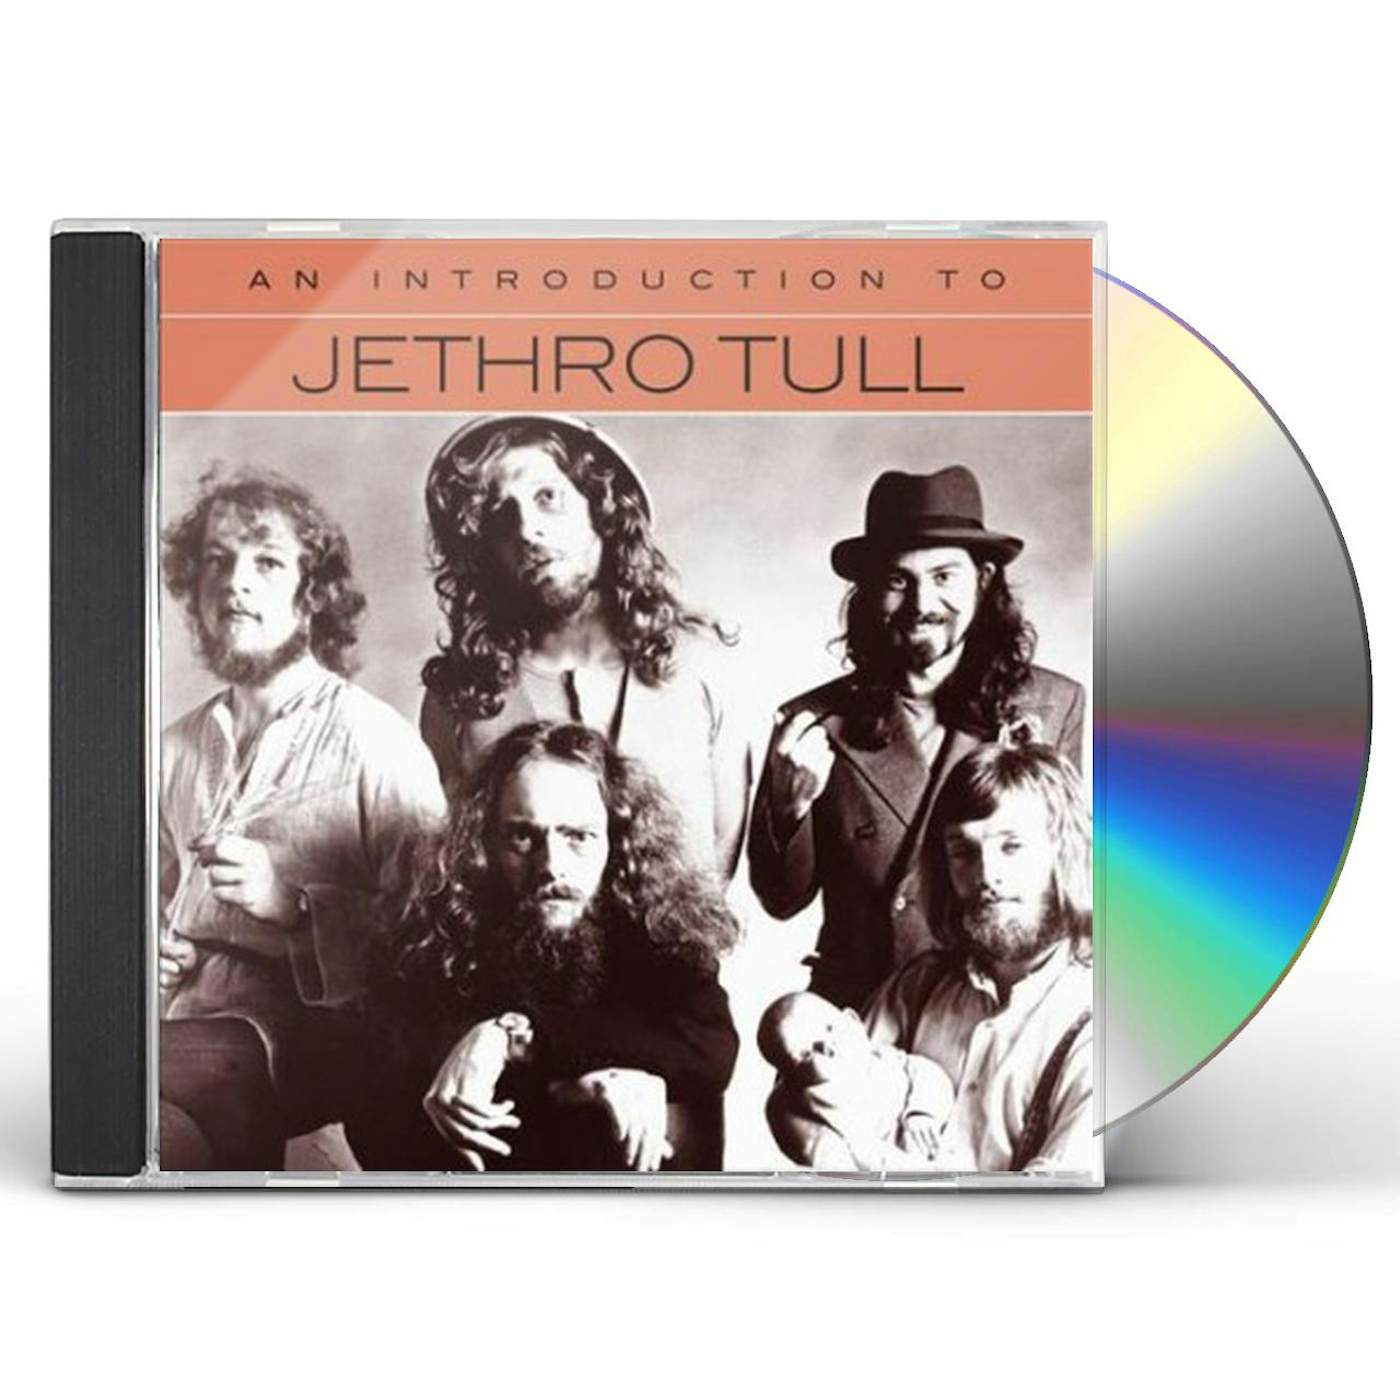 Jethro Tull AN INTRODUCTION TO CD